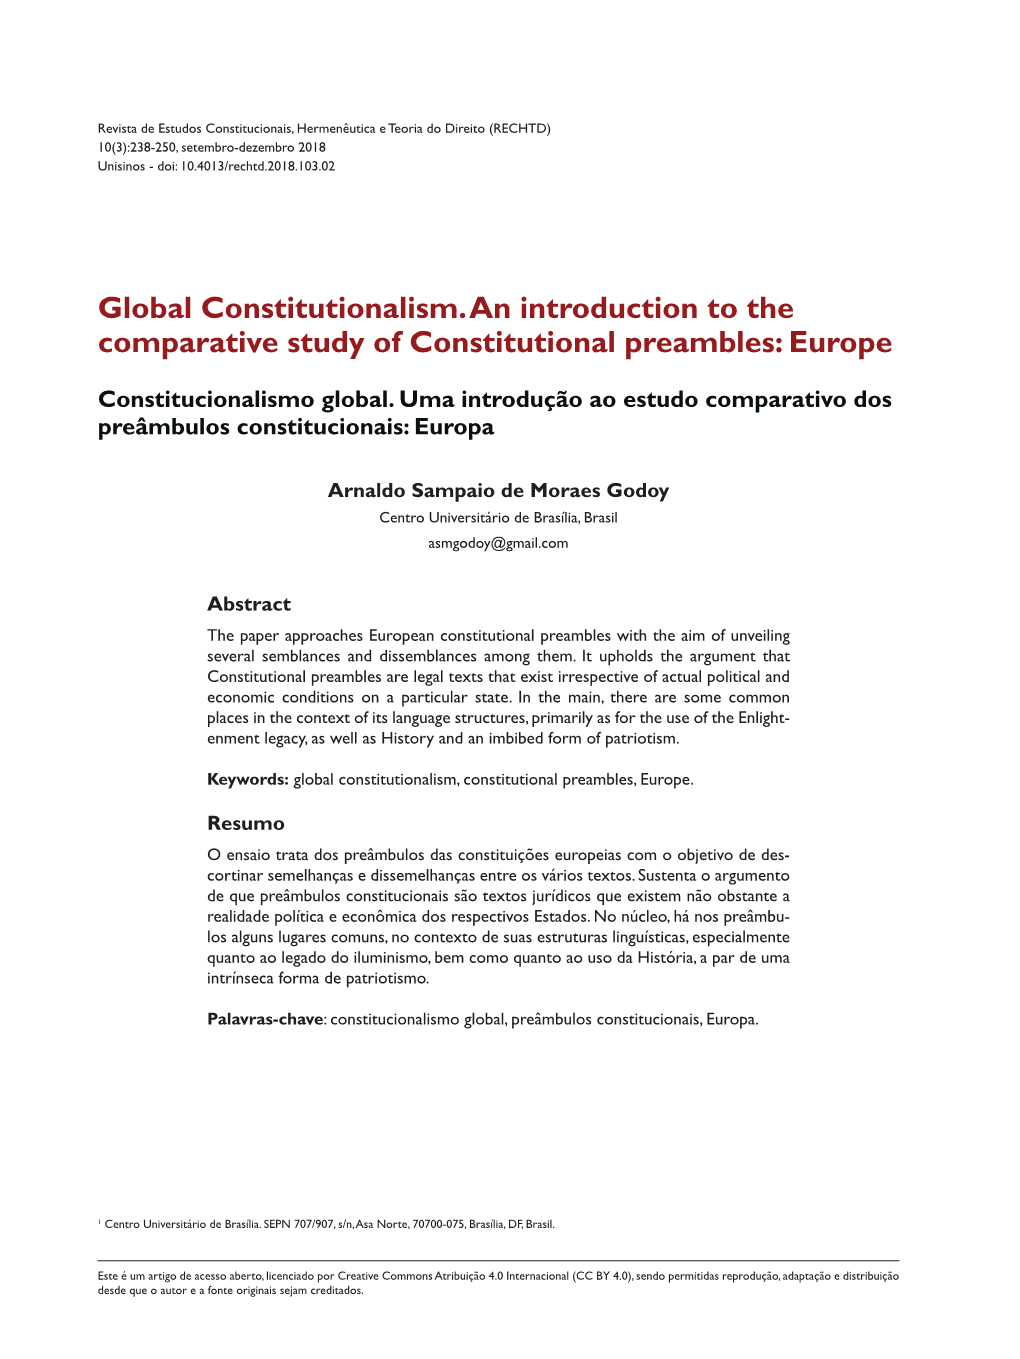 Global Constitutionalism. an Introduction to the Comparative Study of Constitutional Preambles: Europe